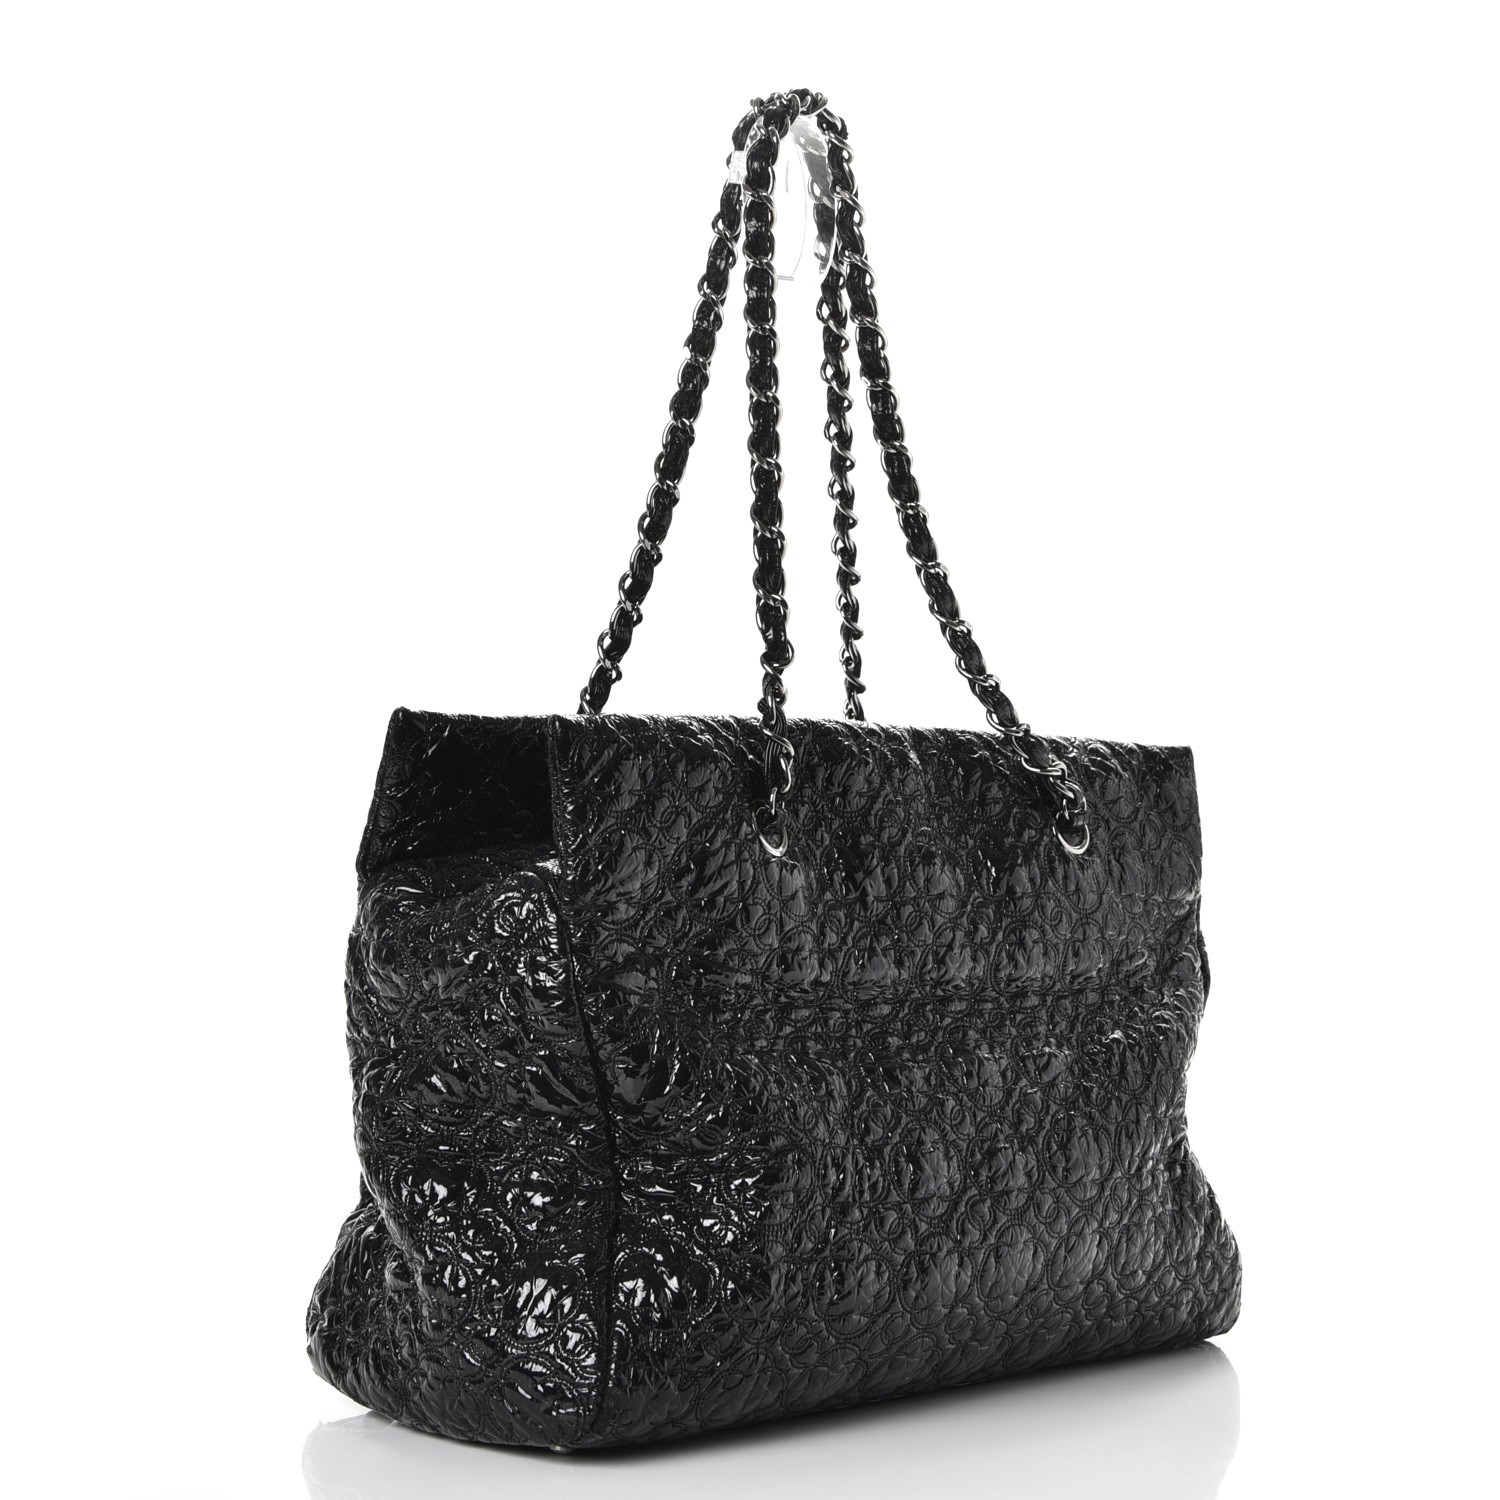 CHANEL Vinyl Rock in Moscow Tote Black 310197 | FASHIONPHILE